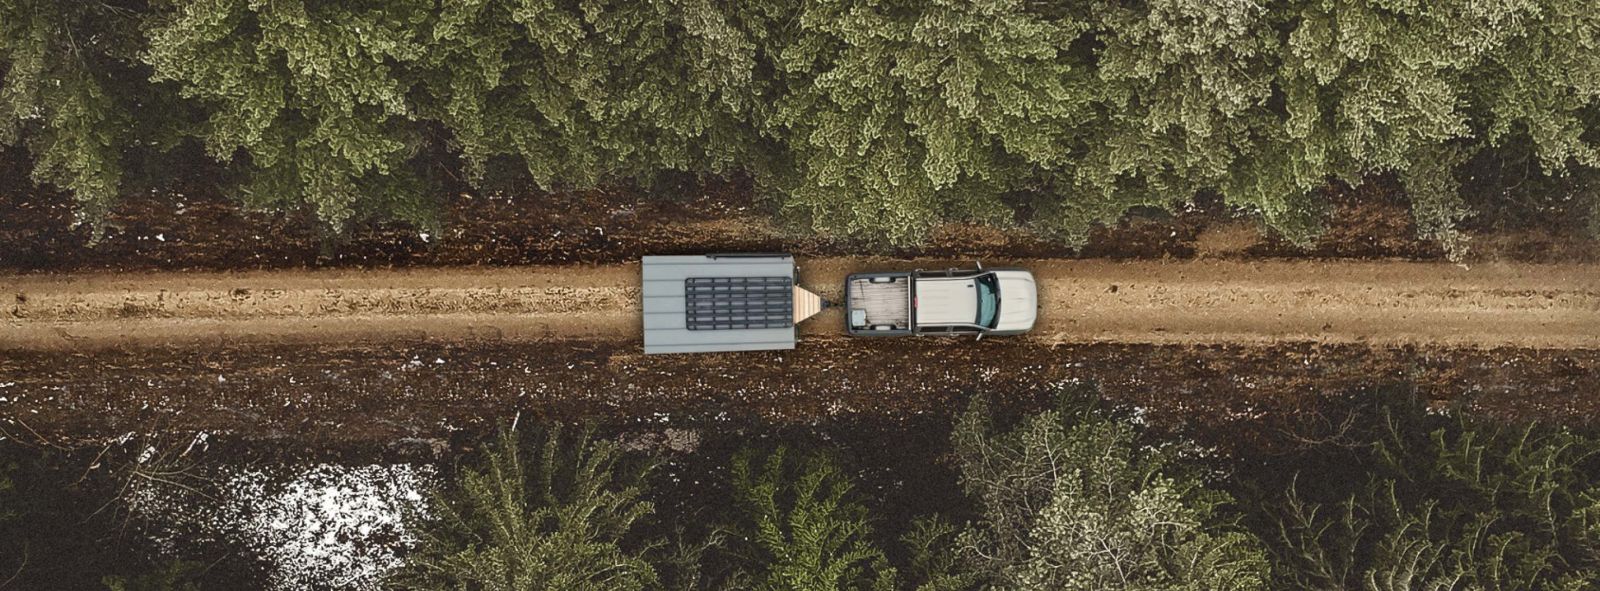 roam is a tiny room on wheels designed to offer everything needed for off grid adventures 3